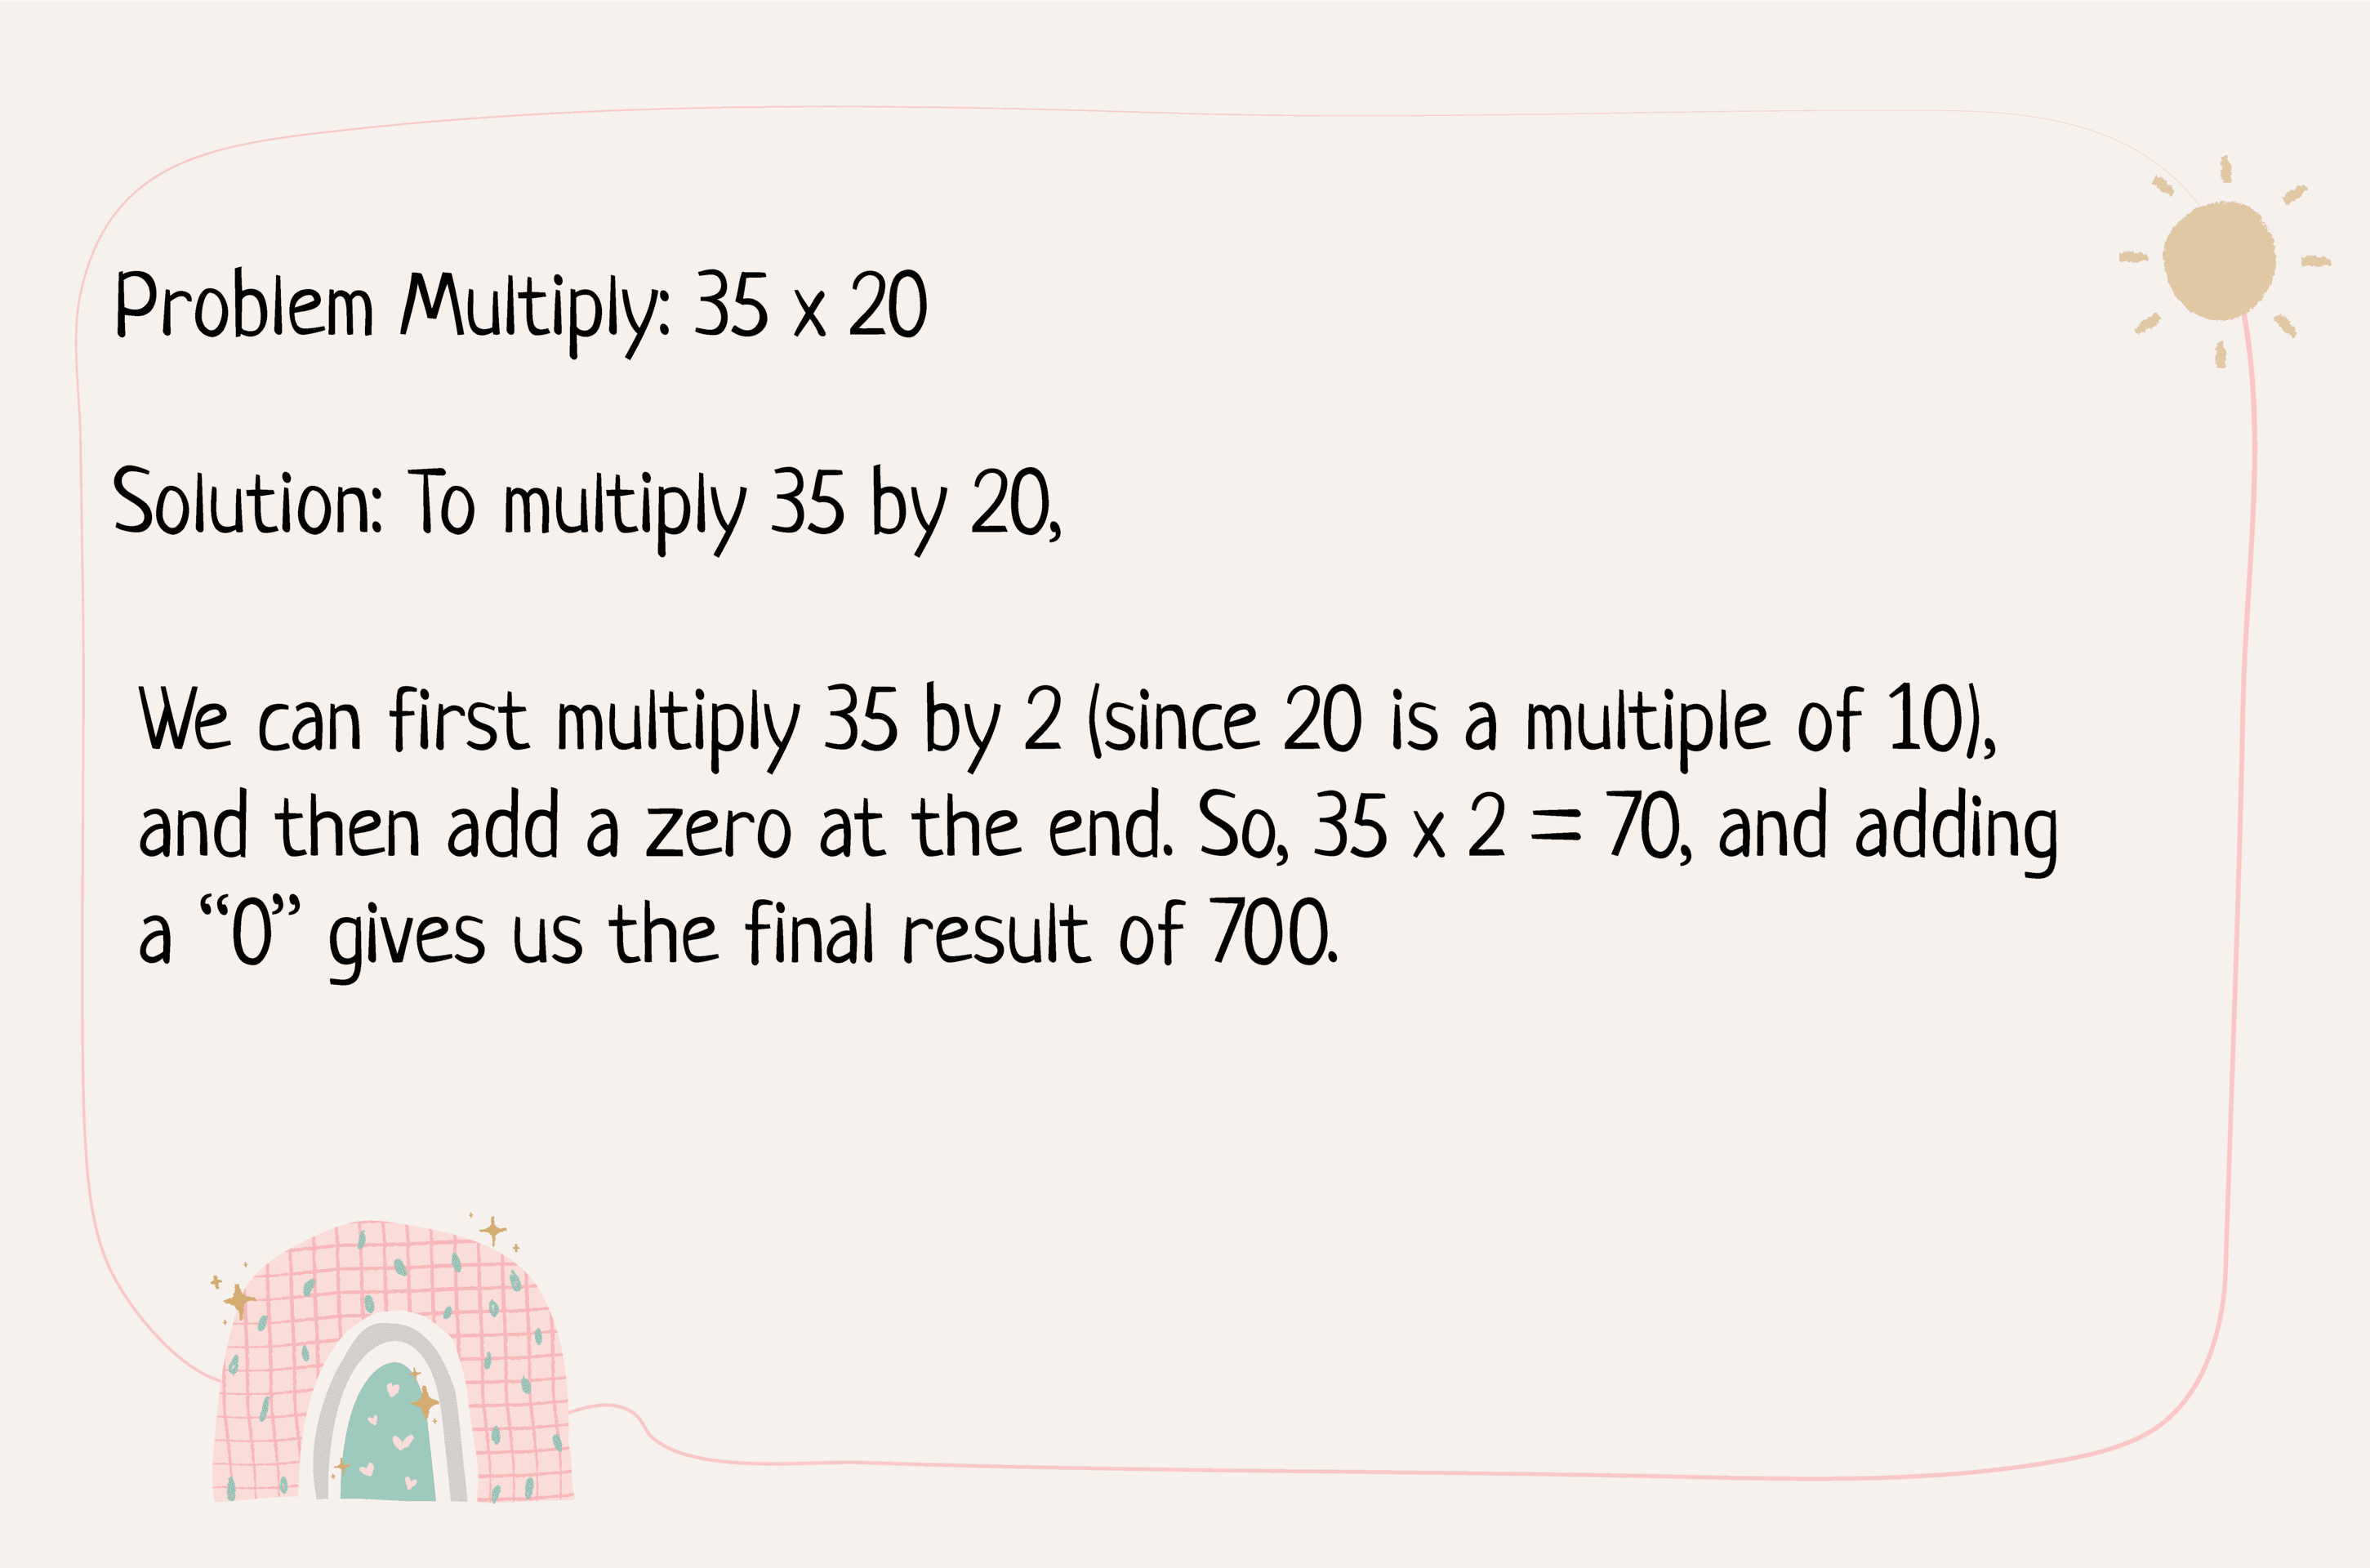 2. Explaining a problem related to multiplying by multiples of 10 100 and 1000